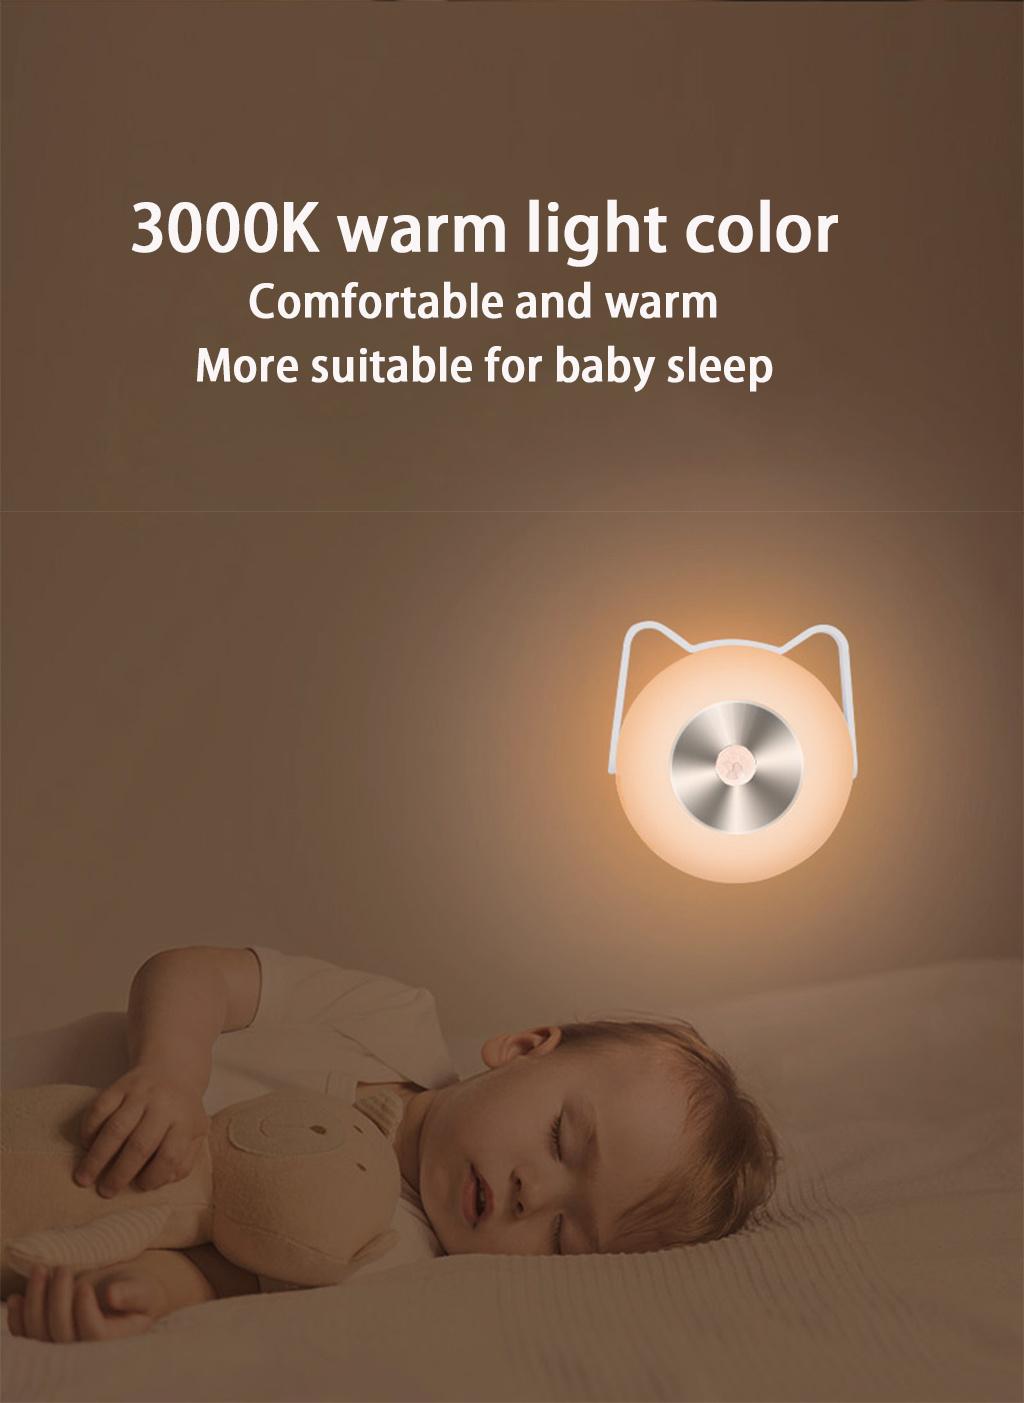 Human Body Induction + Light Control Cabinet Lights, Rechargeable or AA Battery Dual Power Supply Night Light